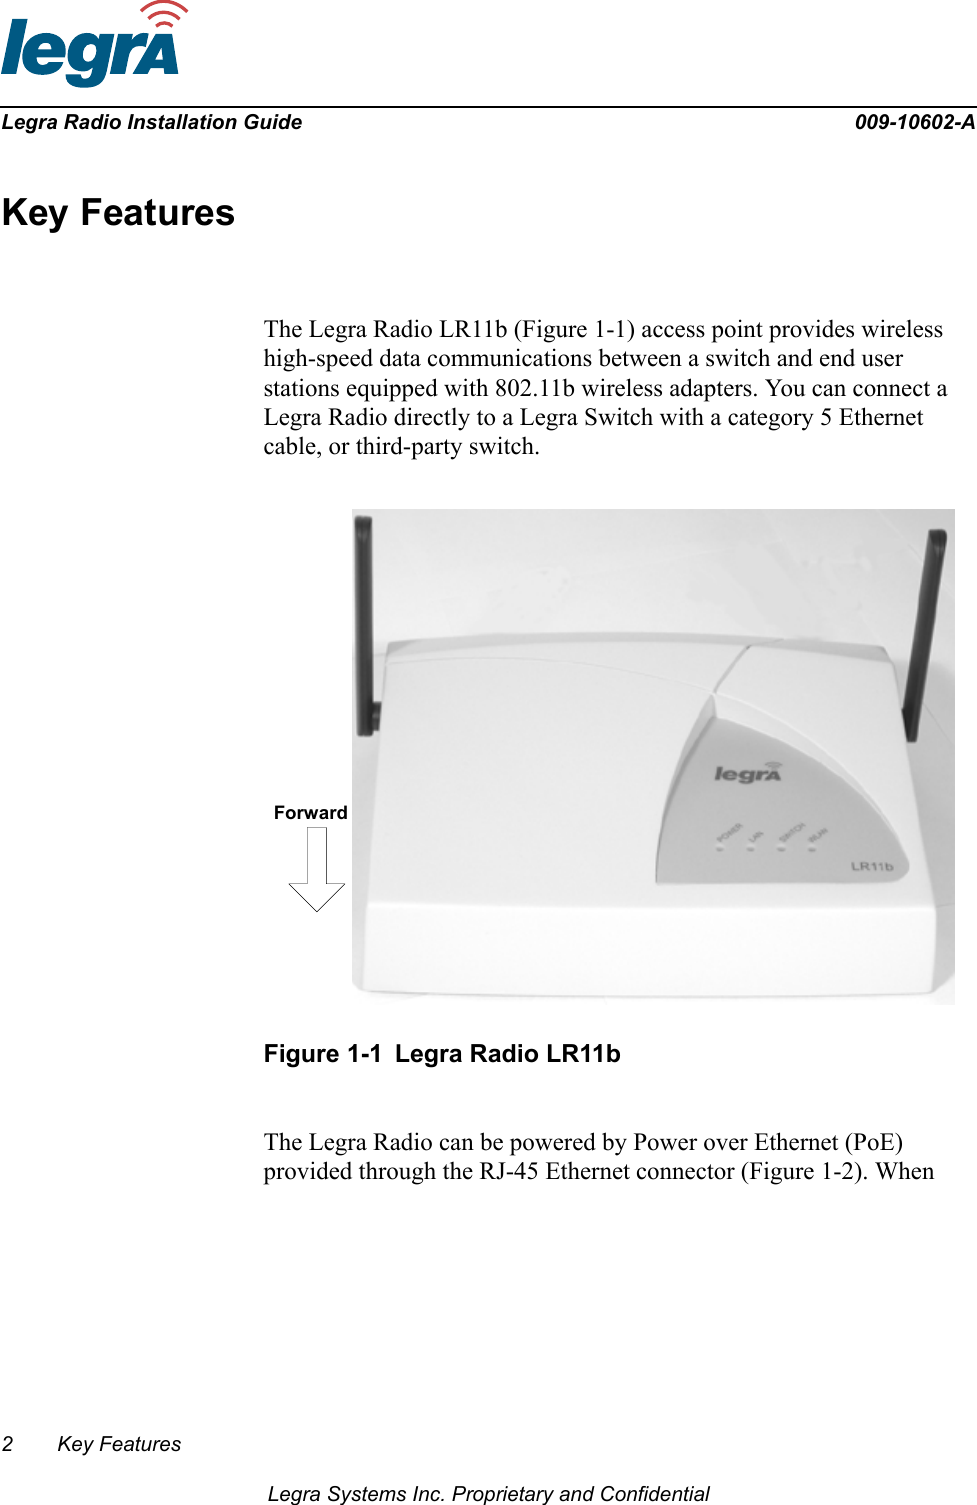 2 Key FeaturesLegra Systems Inc. Proprietary and ConfidentialLegra Radio Installation Guide 009-10602-AKey FeaturesThe Legra Radio LR11b (Figure 1-1) access point provides wireless high-speed data communications between a switch and end user stations equipped with 802.11b wireless adapters. You can connect a Legra Radio directly to a Legra Switch with a category 5 Ethernet cable, or third-party switch.Figure 1-1 Legra Radio LR11bThe Legra Radio can be powered by Power over Ethernet (PoE) provided through the RJ-45 Ethernet connector (Figure 1-2). When Forward